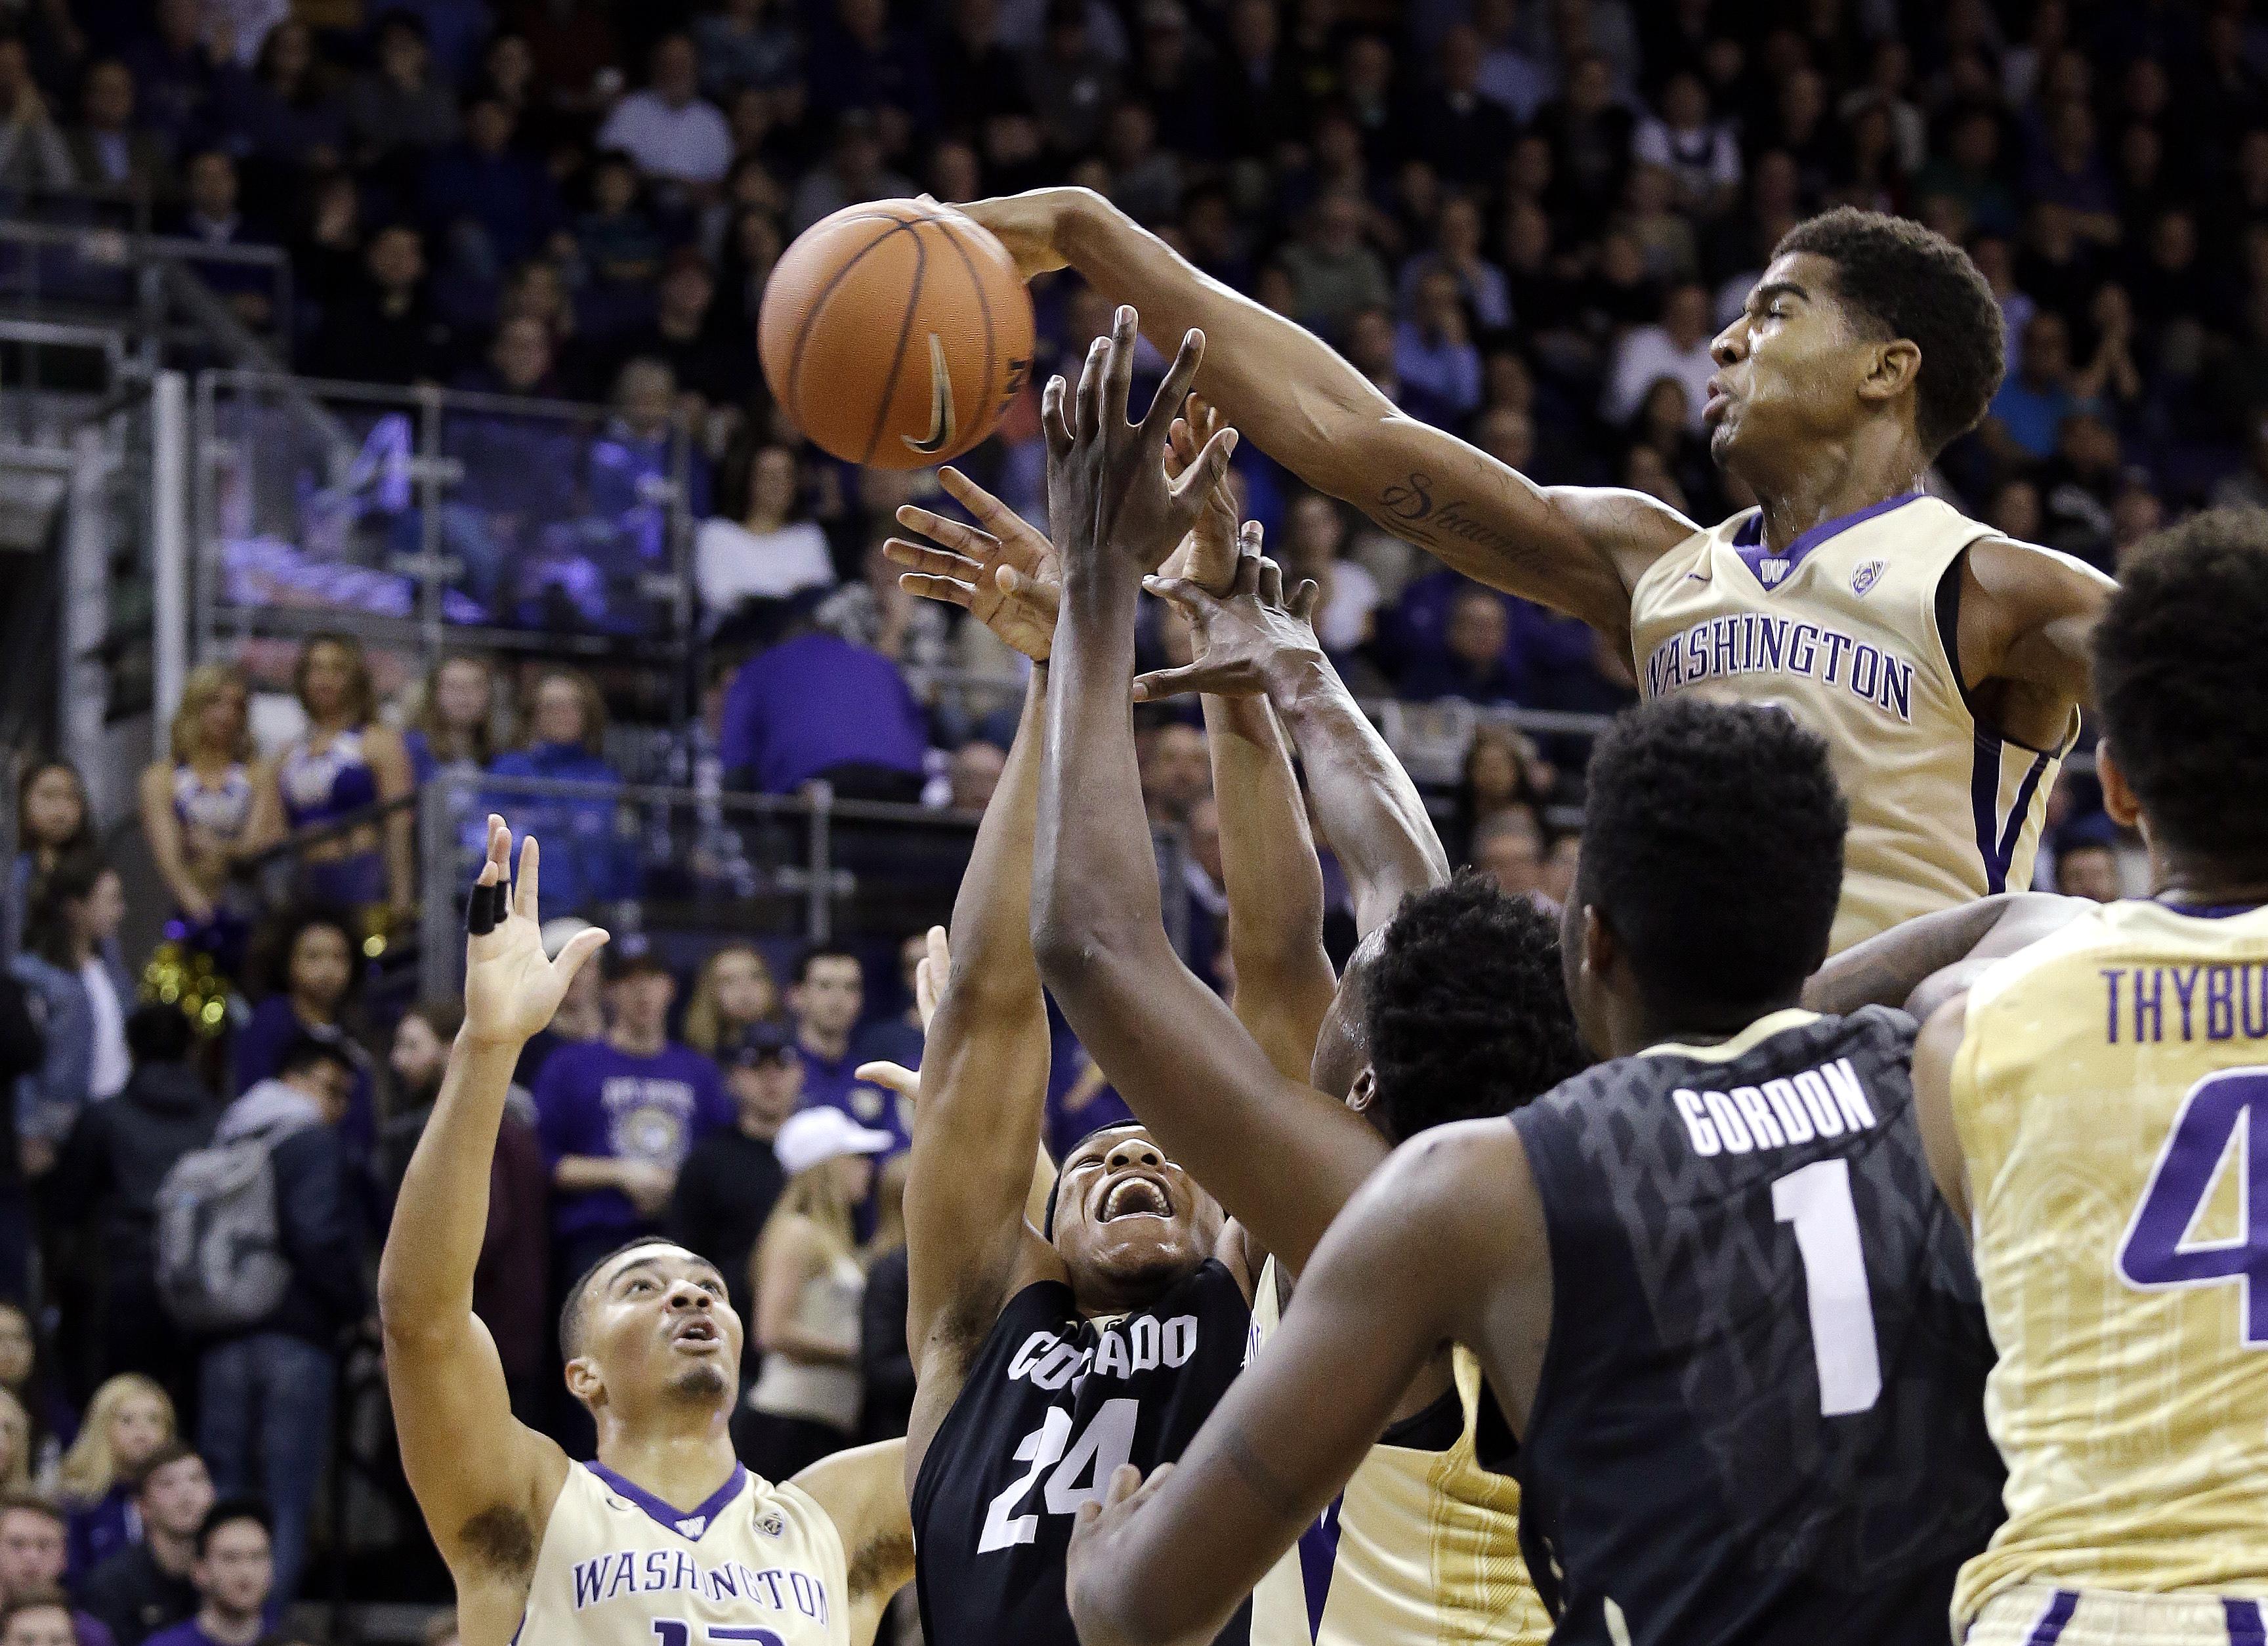 Washington S Marquese Chriss Works To Control Fouls Temper The